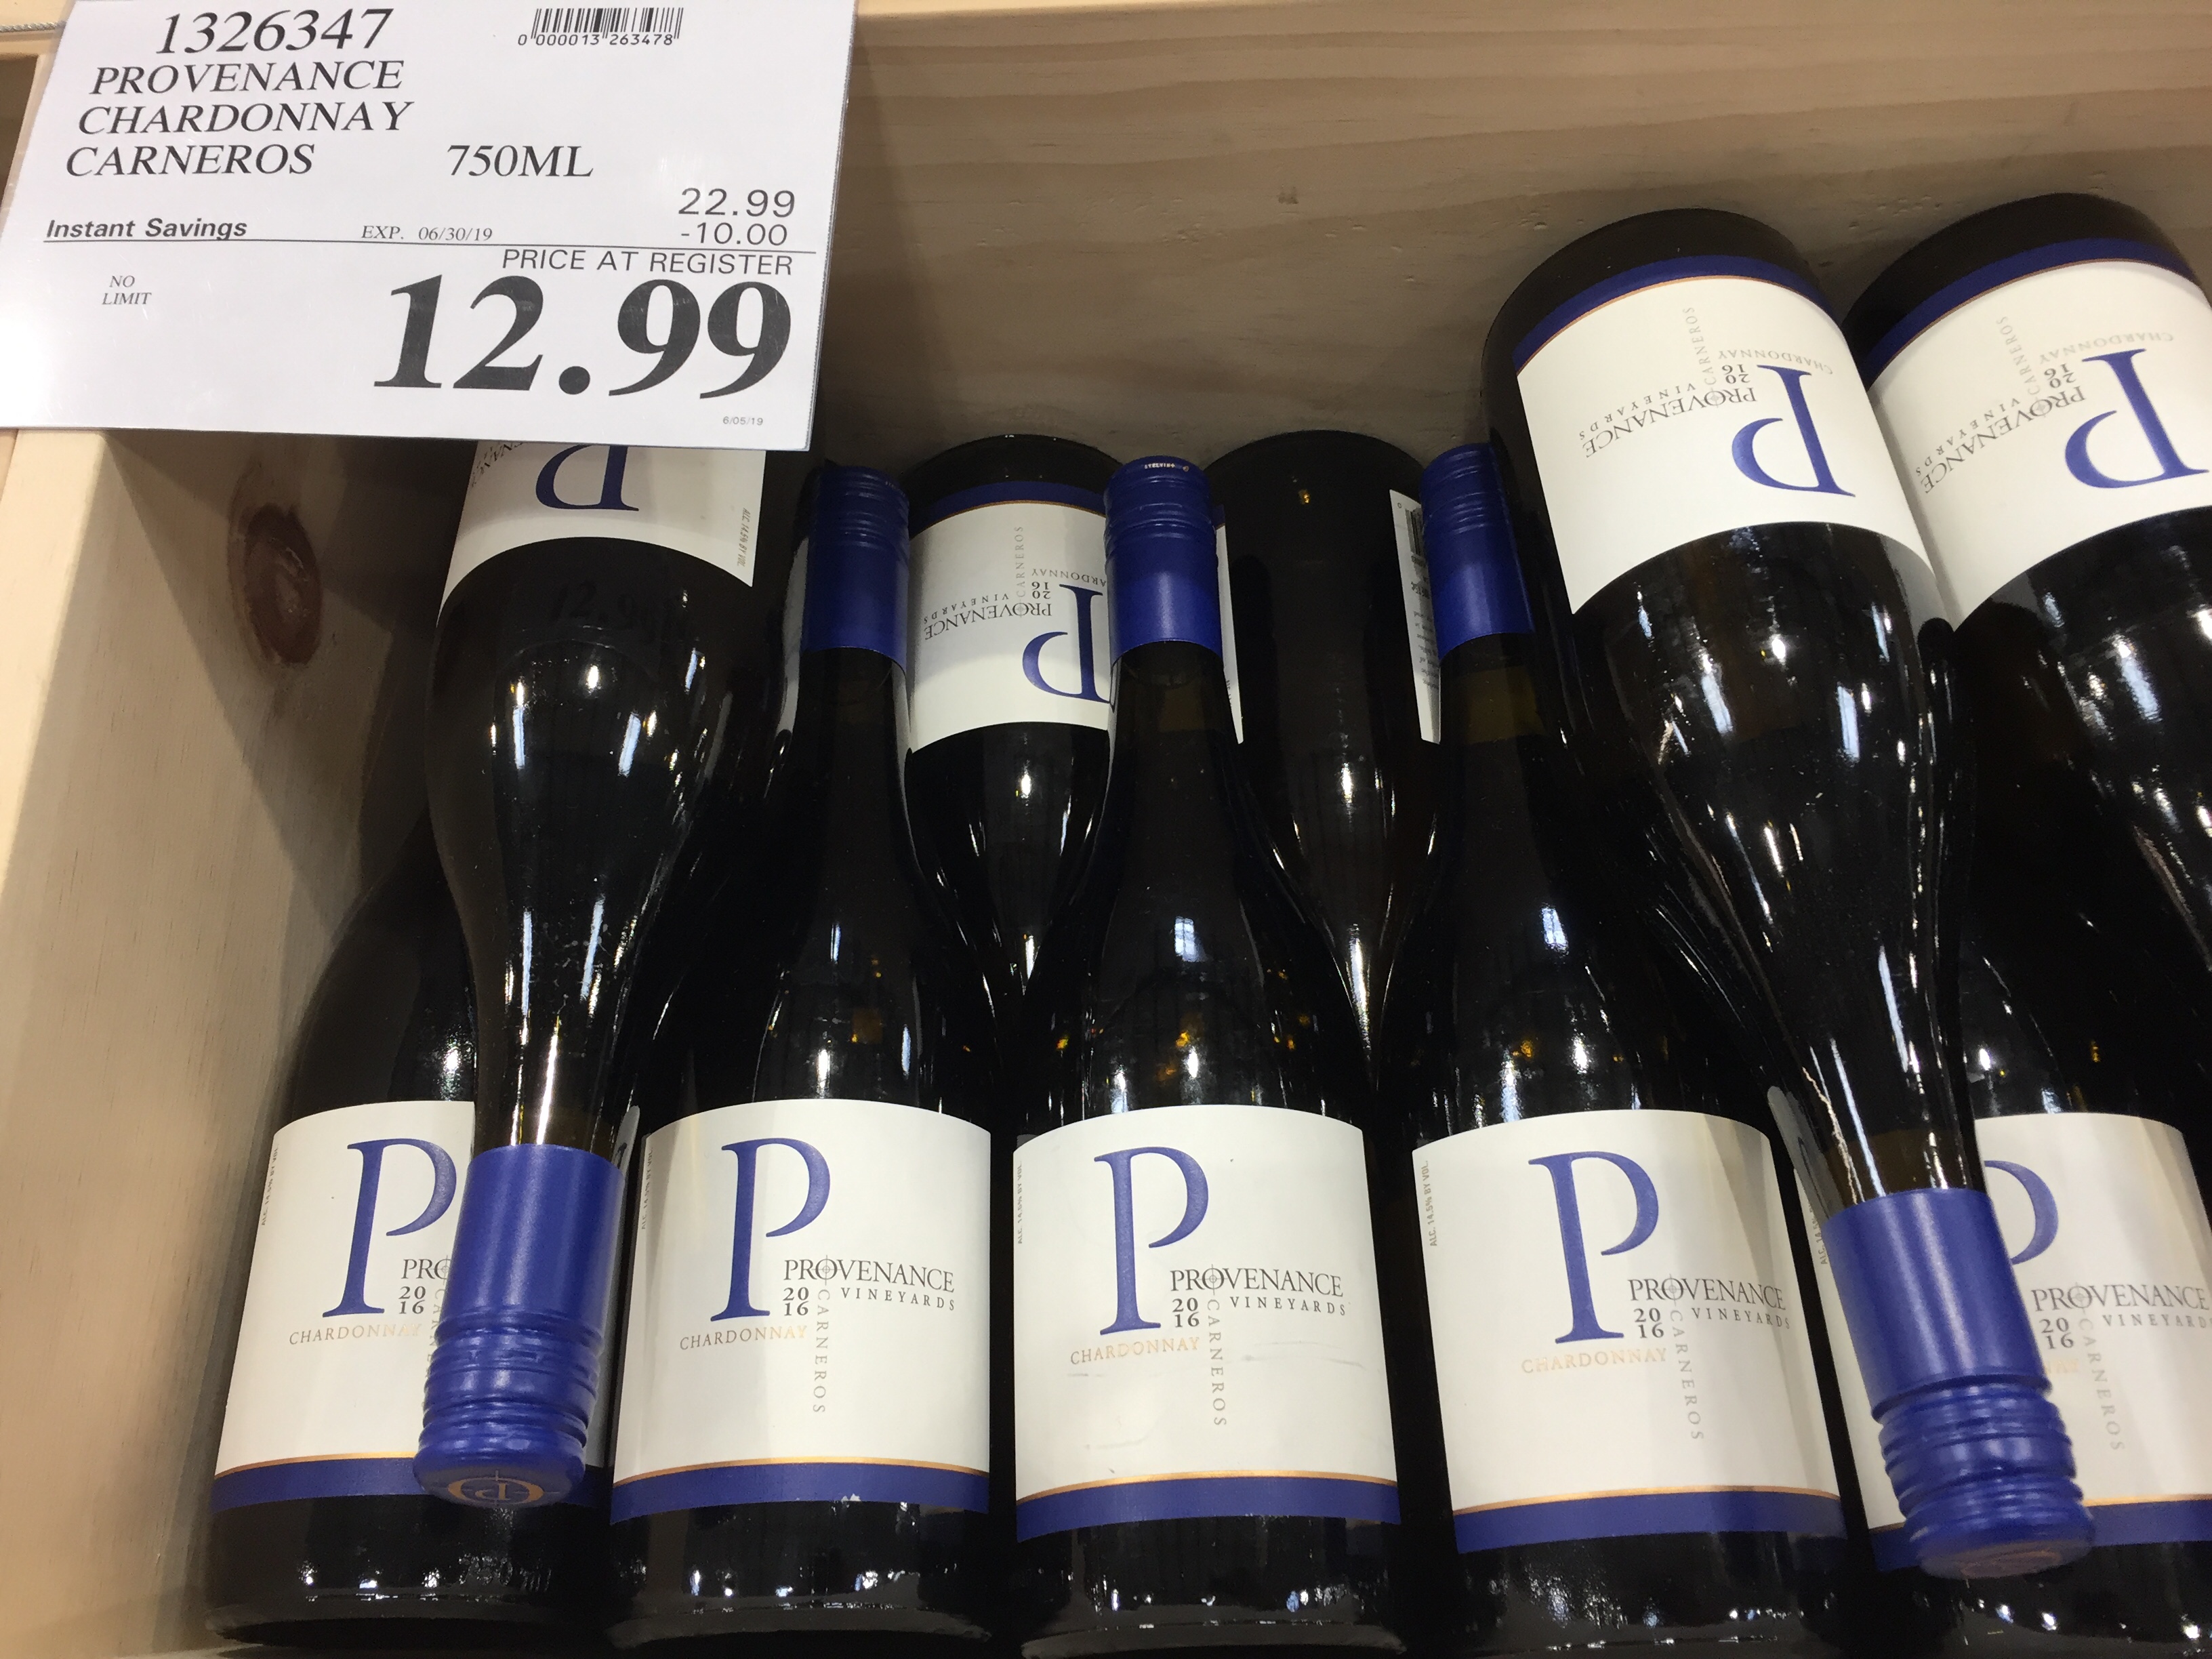 Bin of Provenance Chardonnay at Costco, $10 off and $12,99 final price.